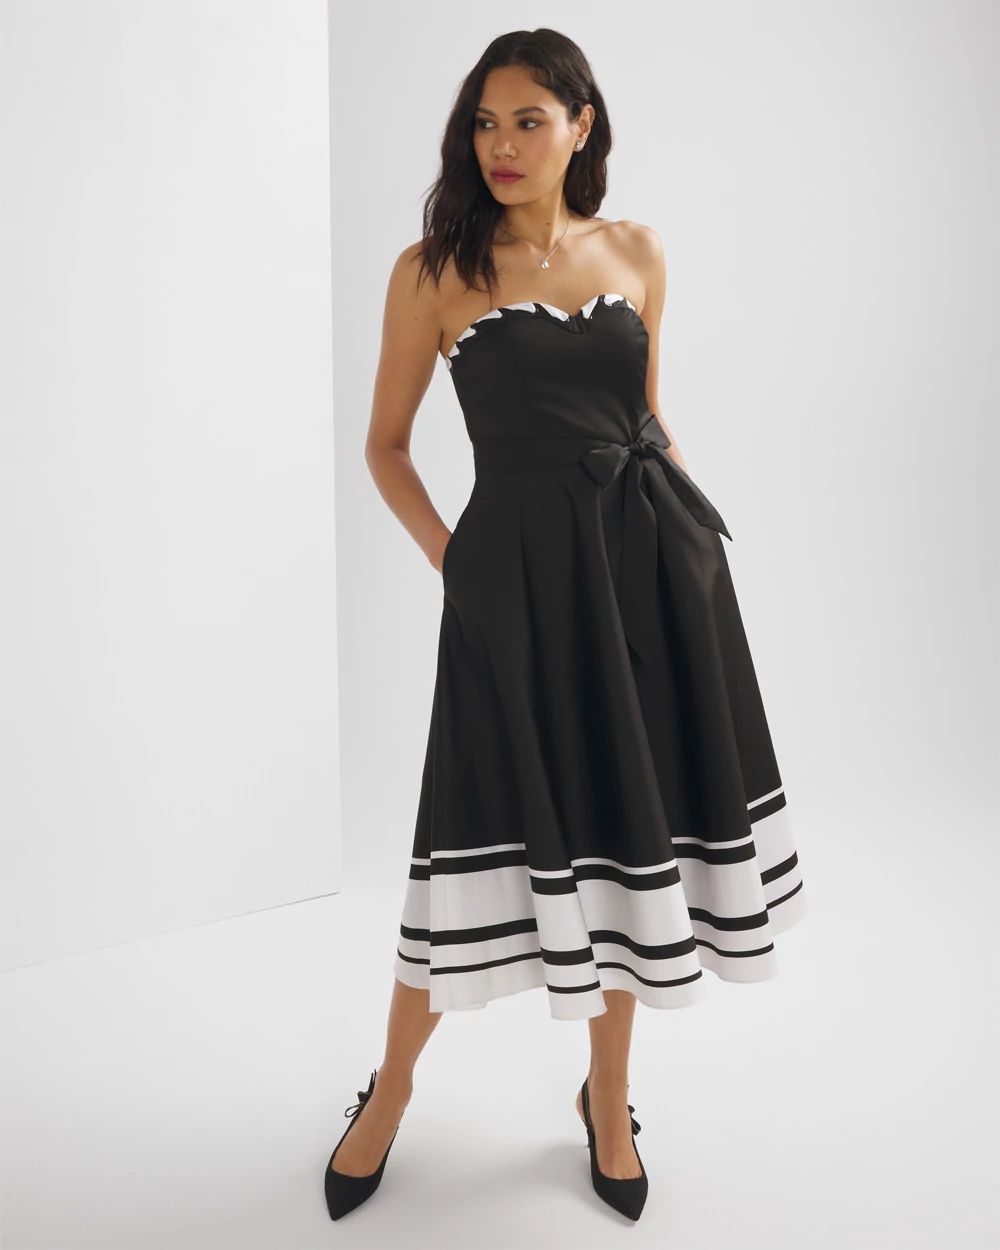 Strapless Sweetheart Fit-N-Flare Dress click to view larger image.